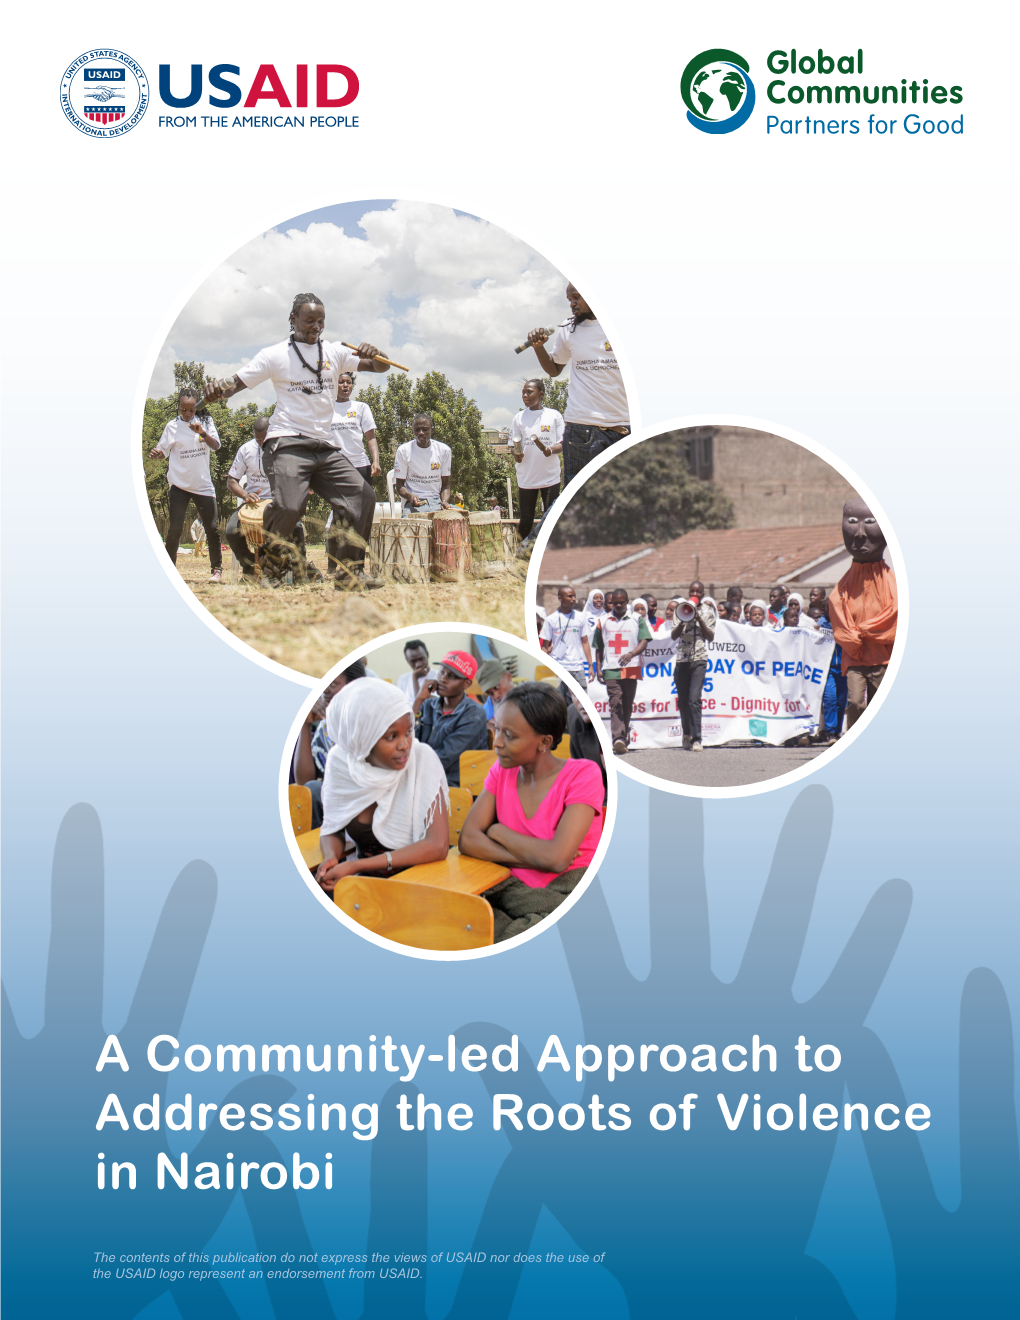 A Community-Led Approach to Addressing the Roots of Violence in Nairobi